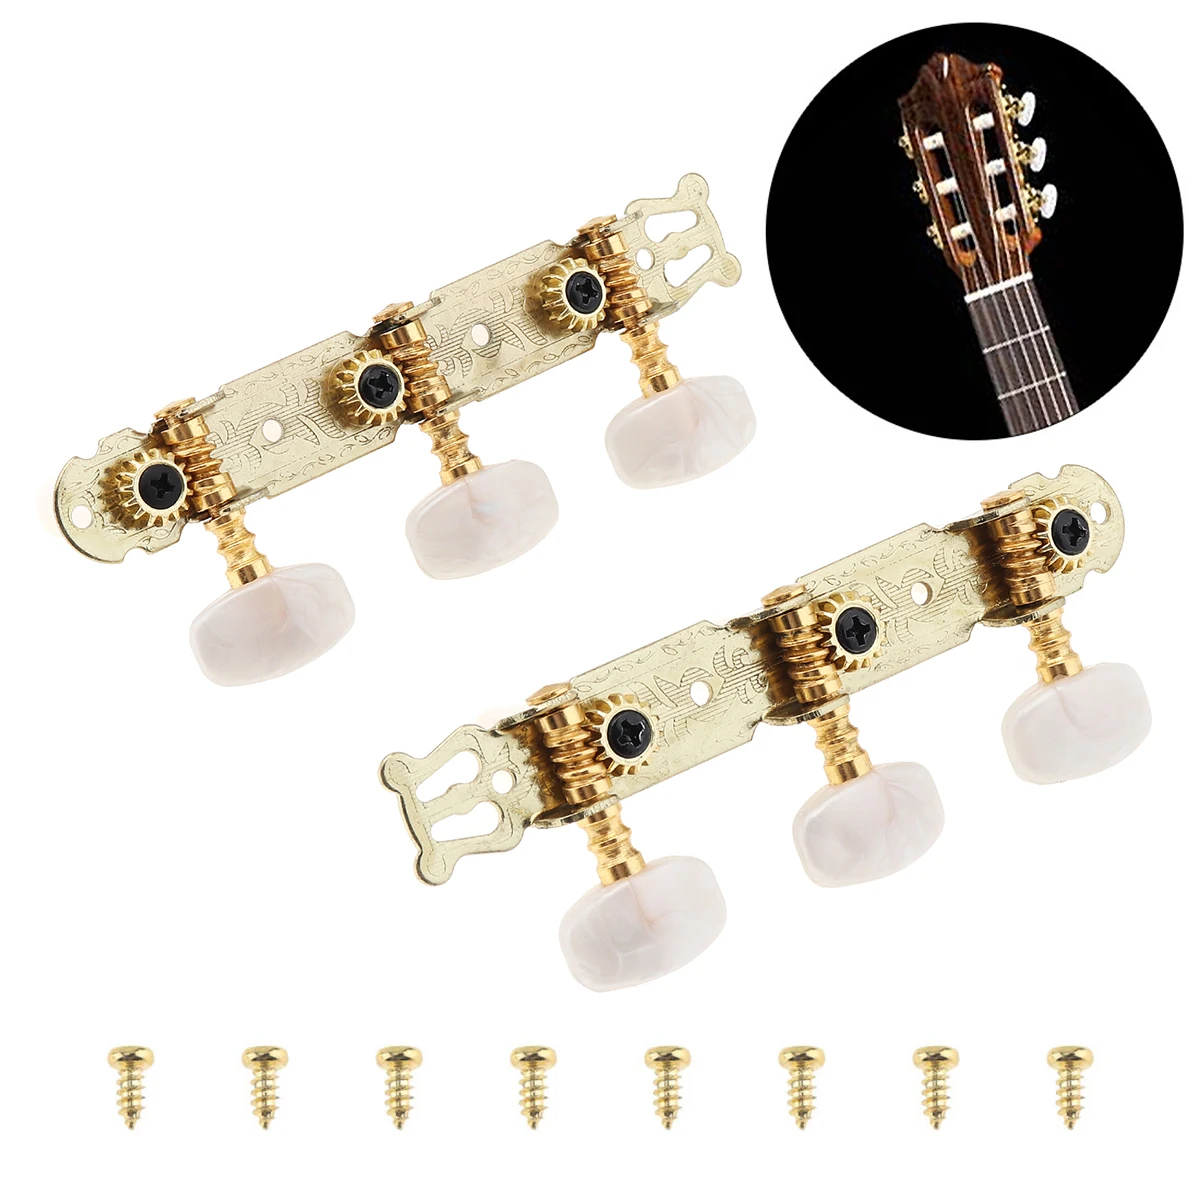 

1 pair Classical Folk Guitar Tuning Pegs Gold Plated Guitarra Parts with Simulation Pearl Semicircle Buttons Machine Heads